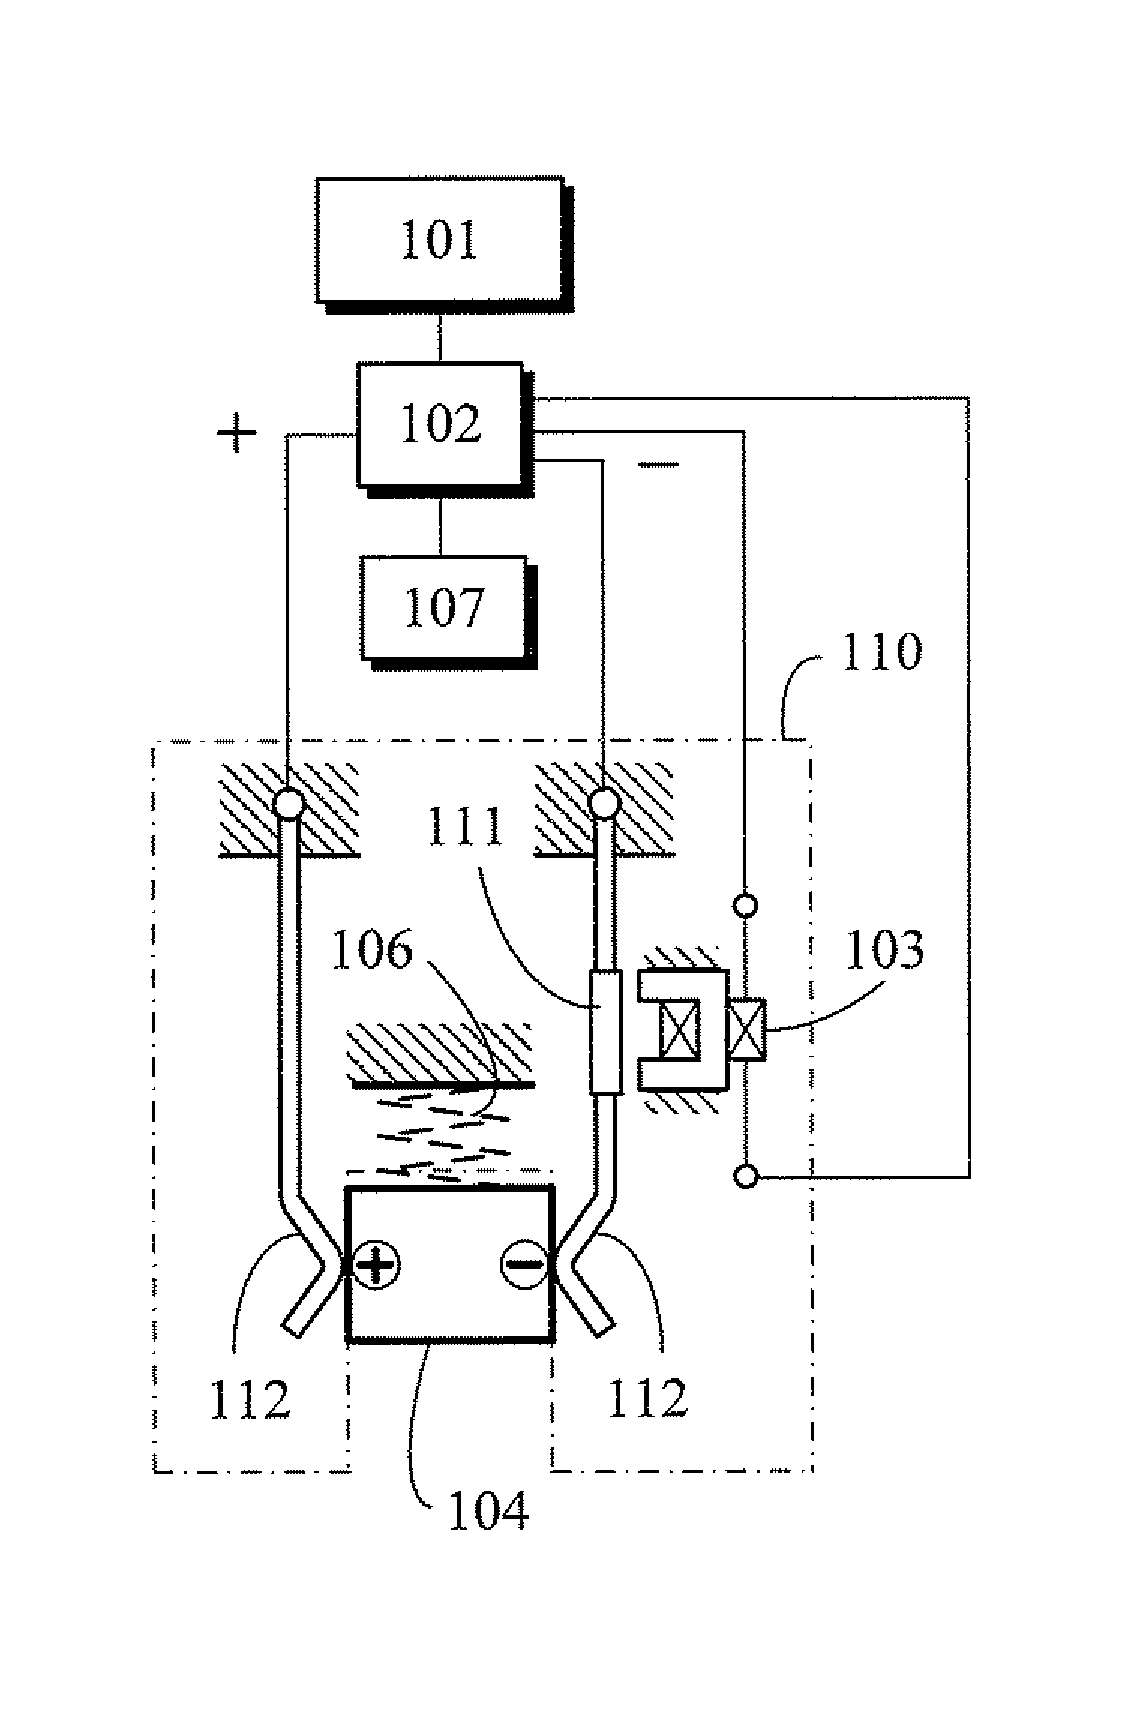 Power charging device with charge saturation disconnector through electromagnetic force release